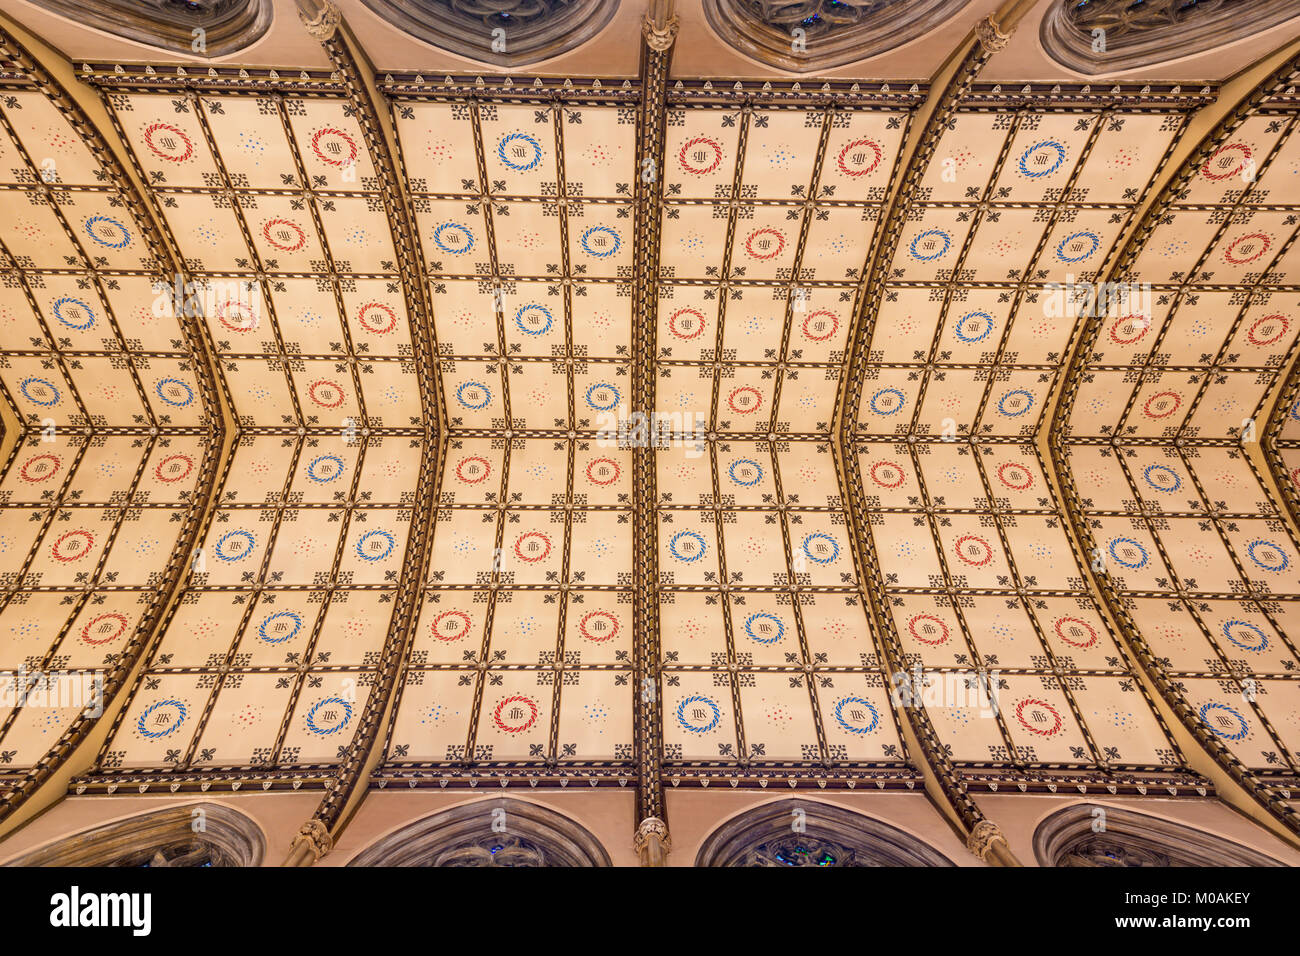 LONDON, GREAT BRITAIN - SEPTEMBER 18, 2017: The ceiling of church Immaculate Conception, Farm Street. Stock Photo